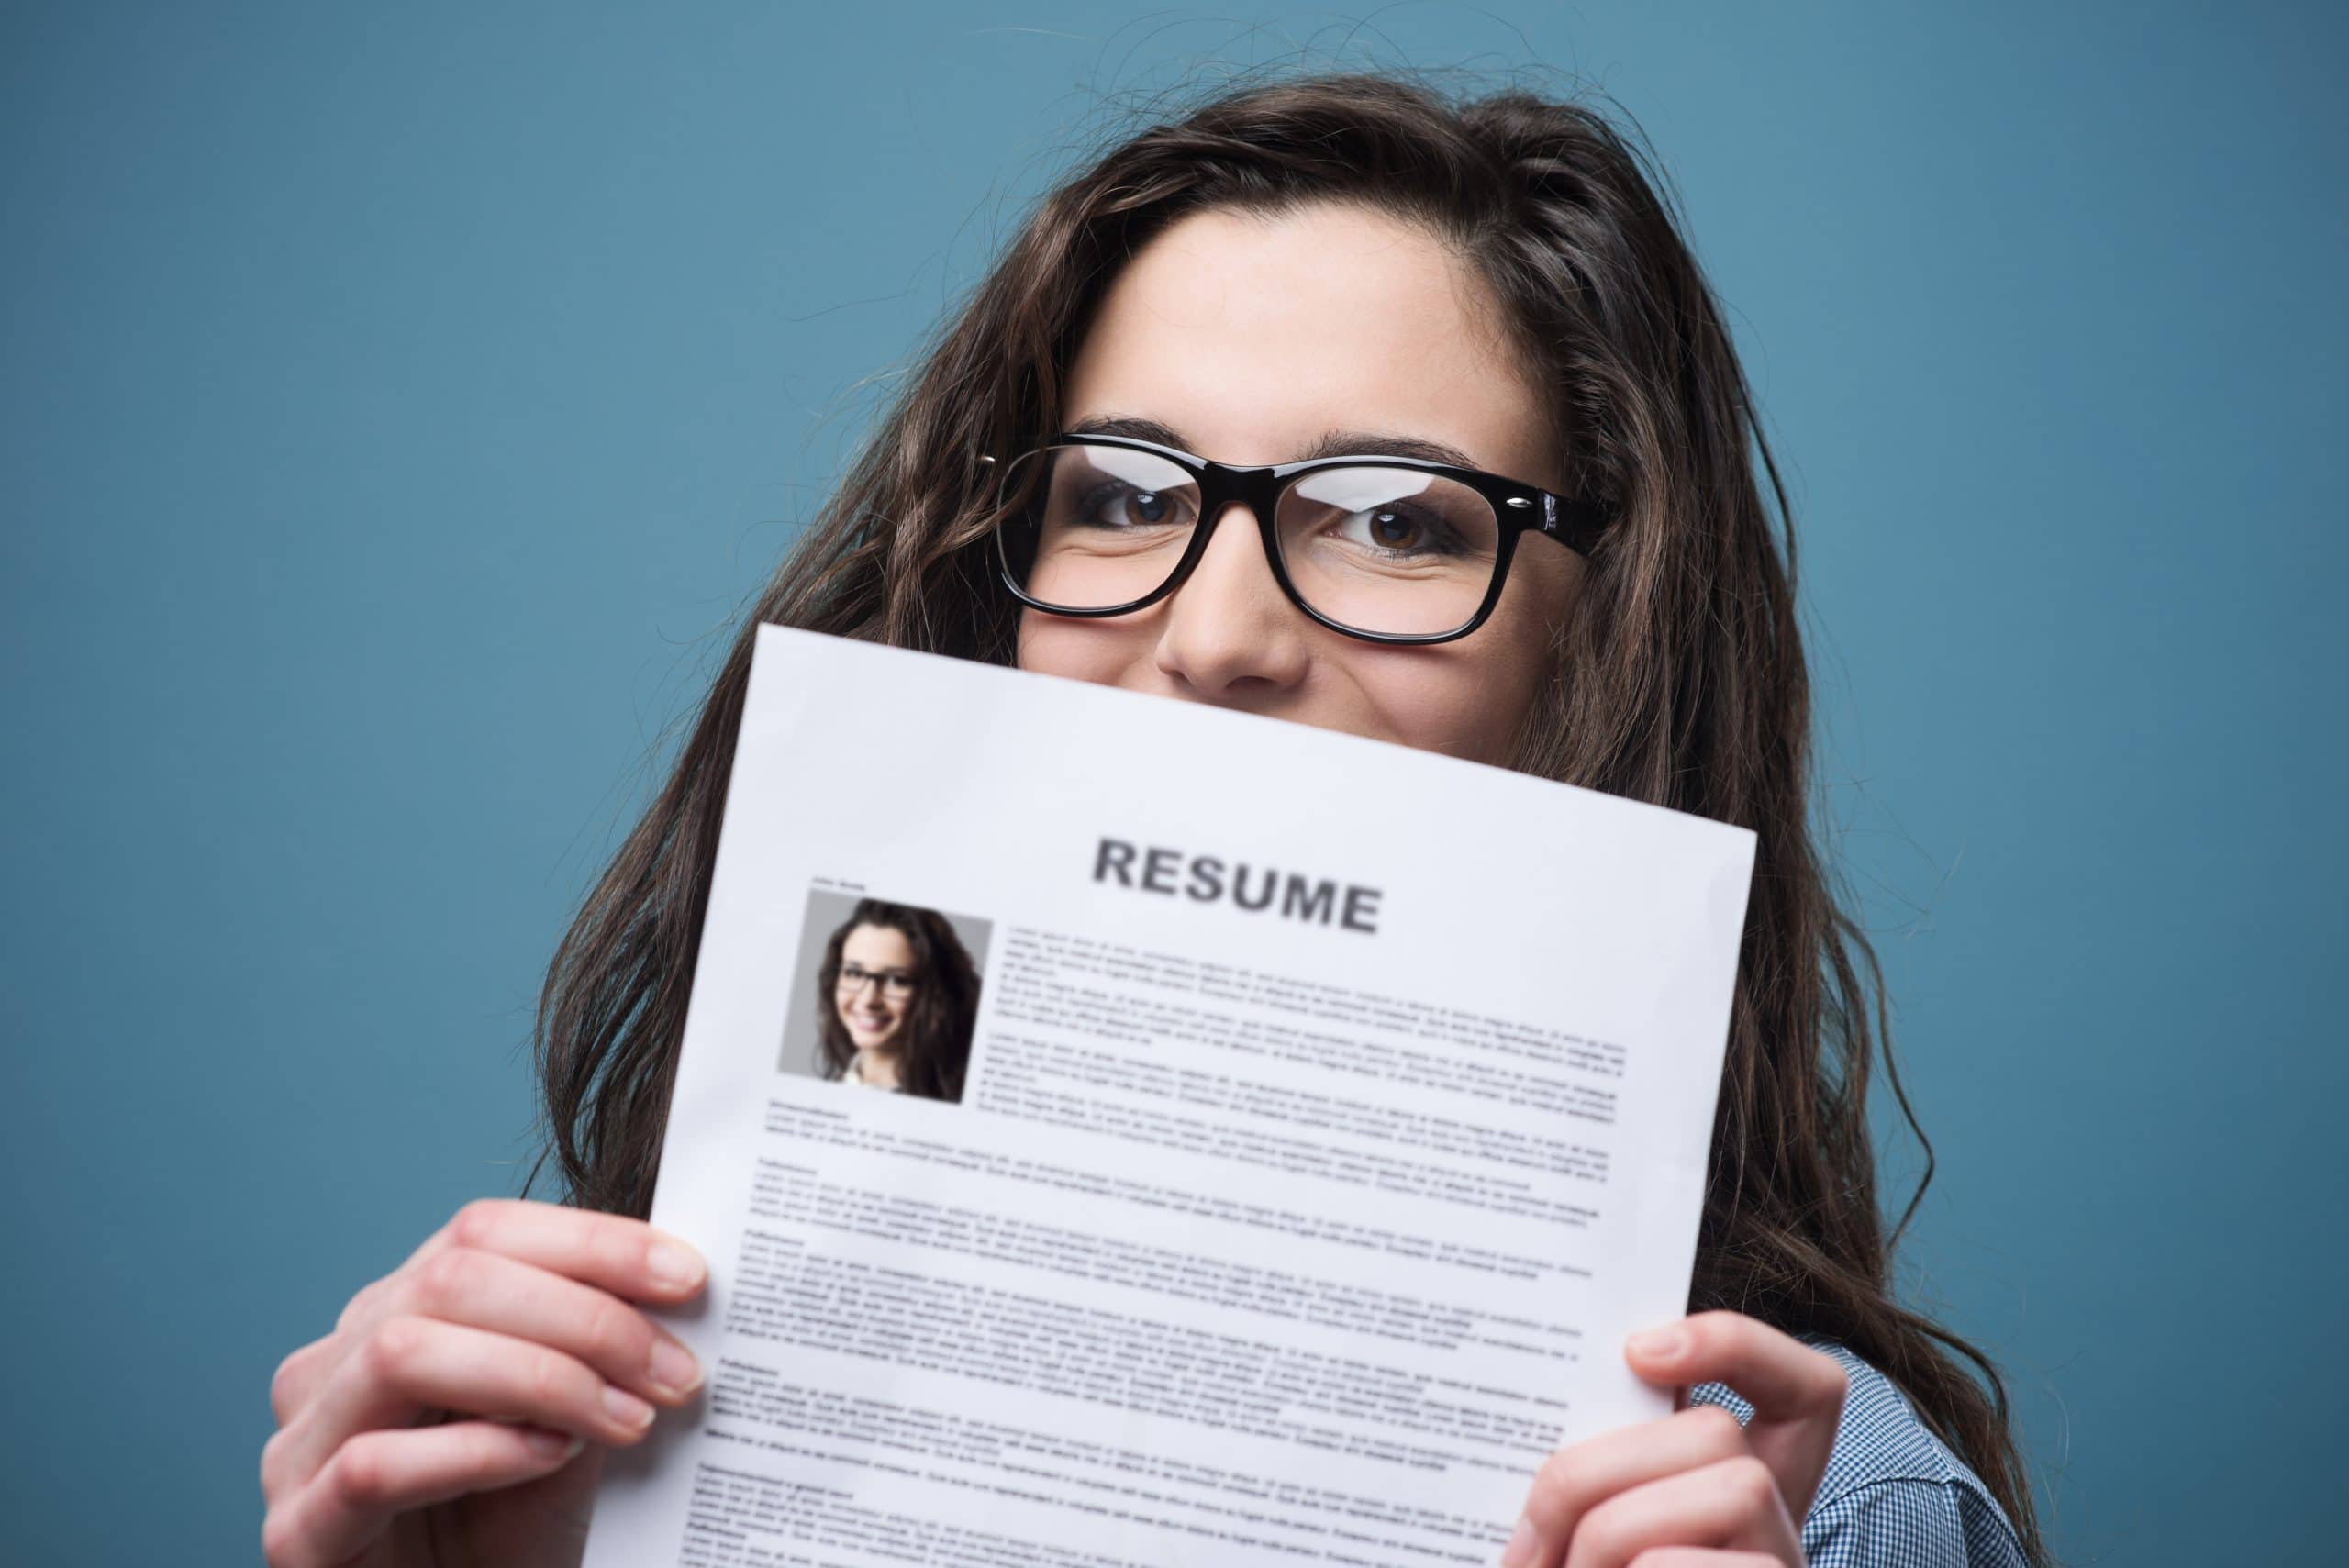 Benefits of Resume Writing Services - Ignite Your Potential